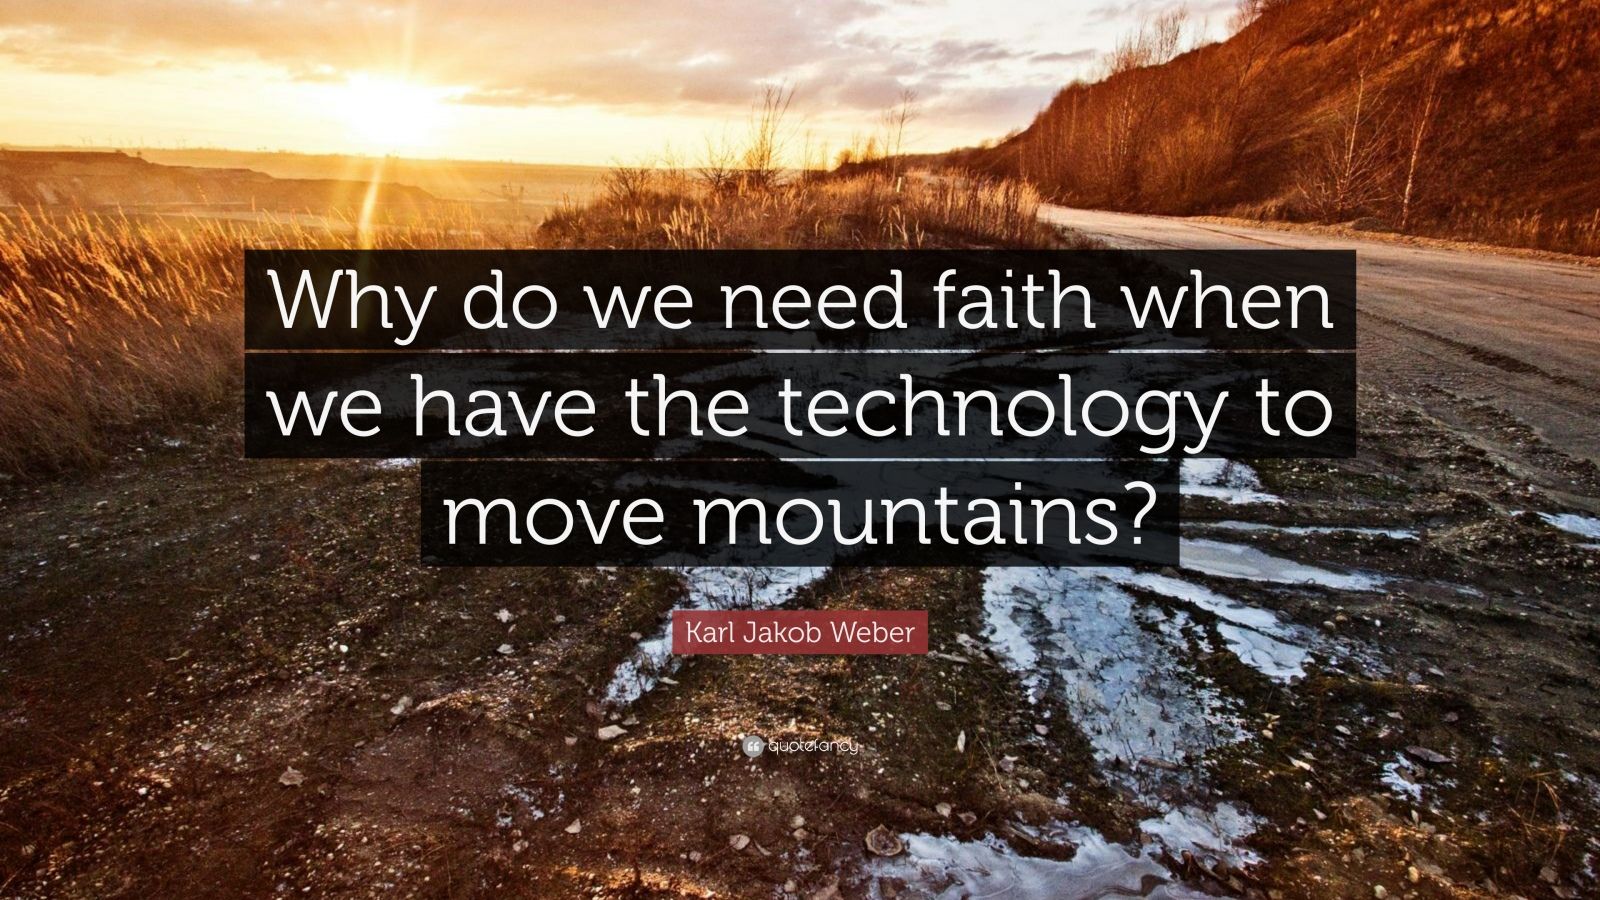 Karl Jakob Weber Quote: "Why do we need faith when we have the technology to move mountains?" (7 ...